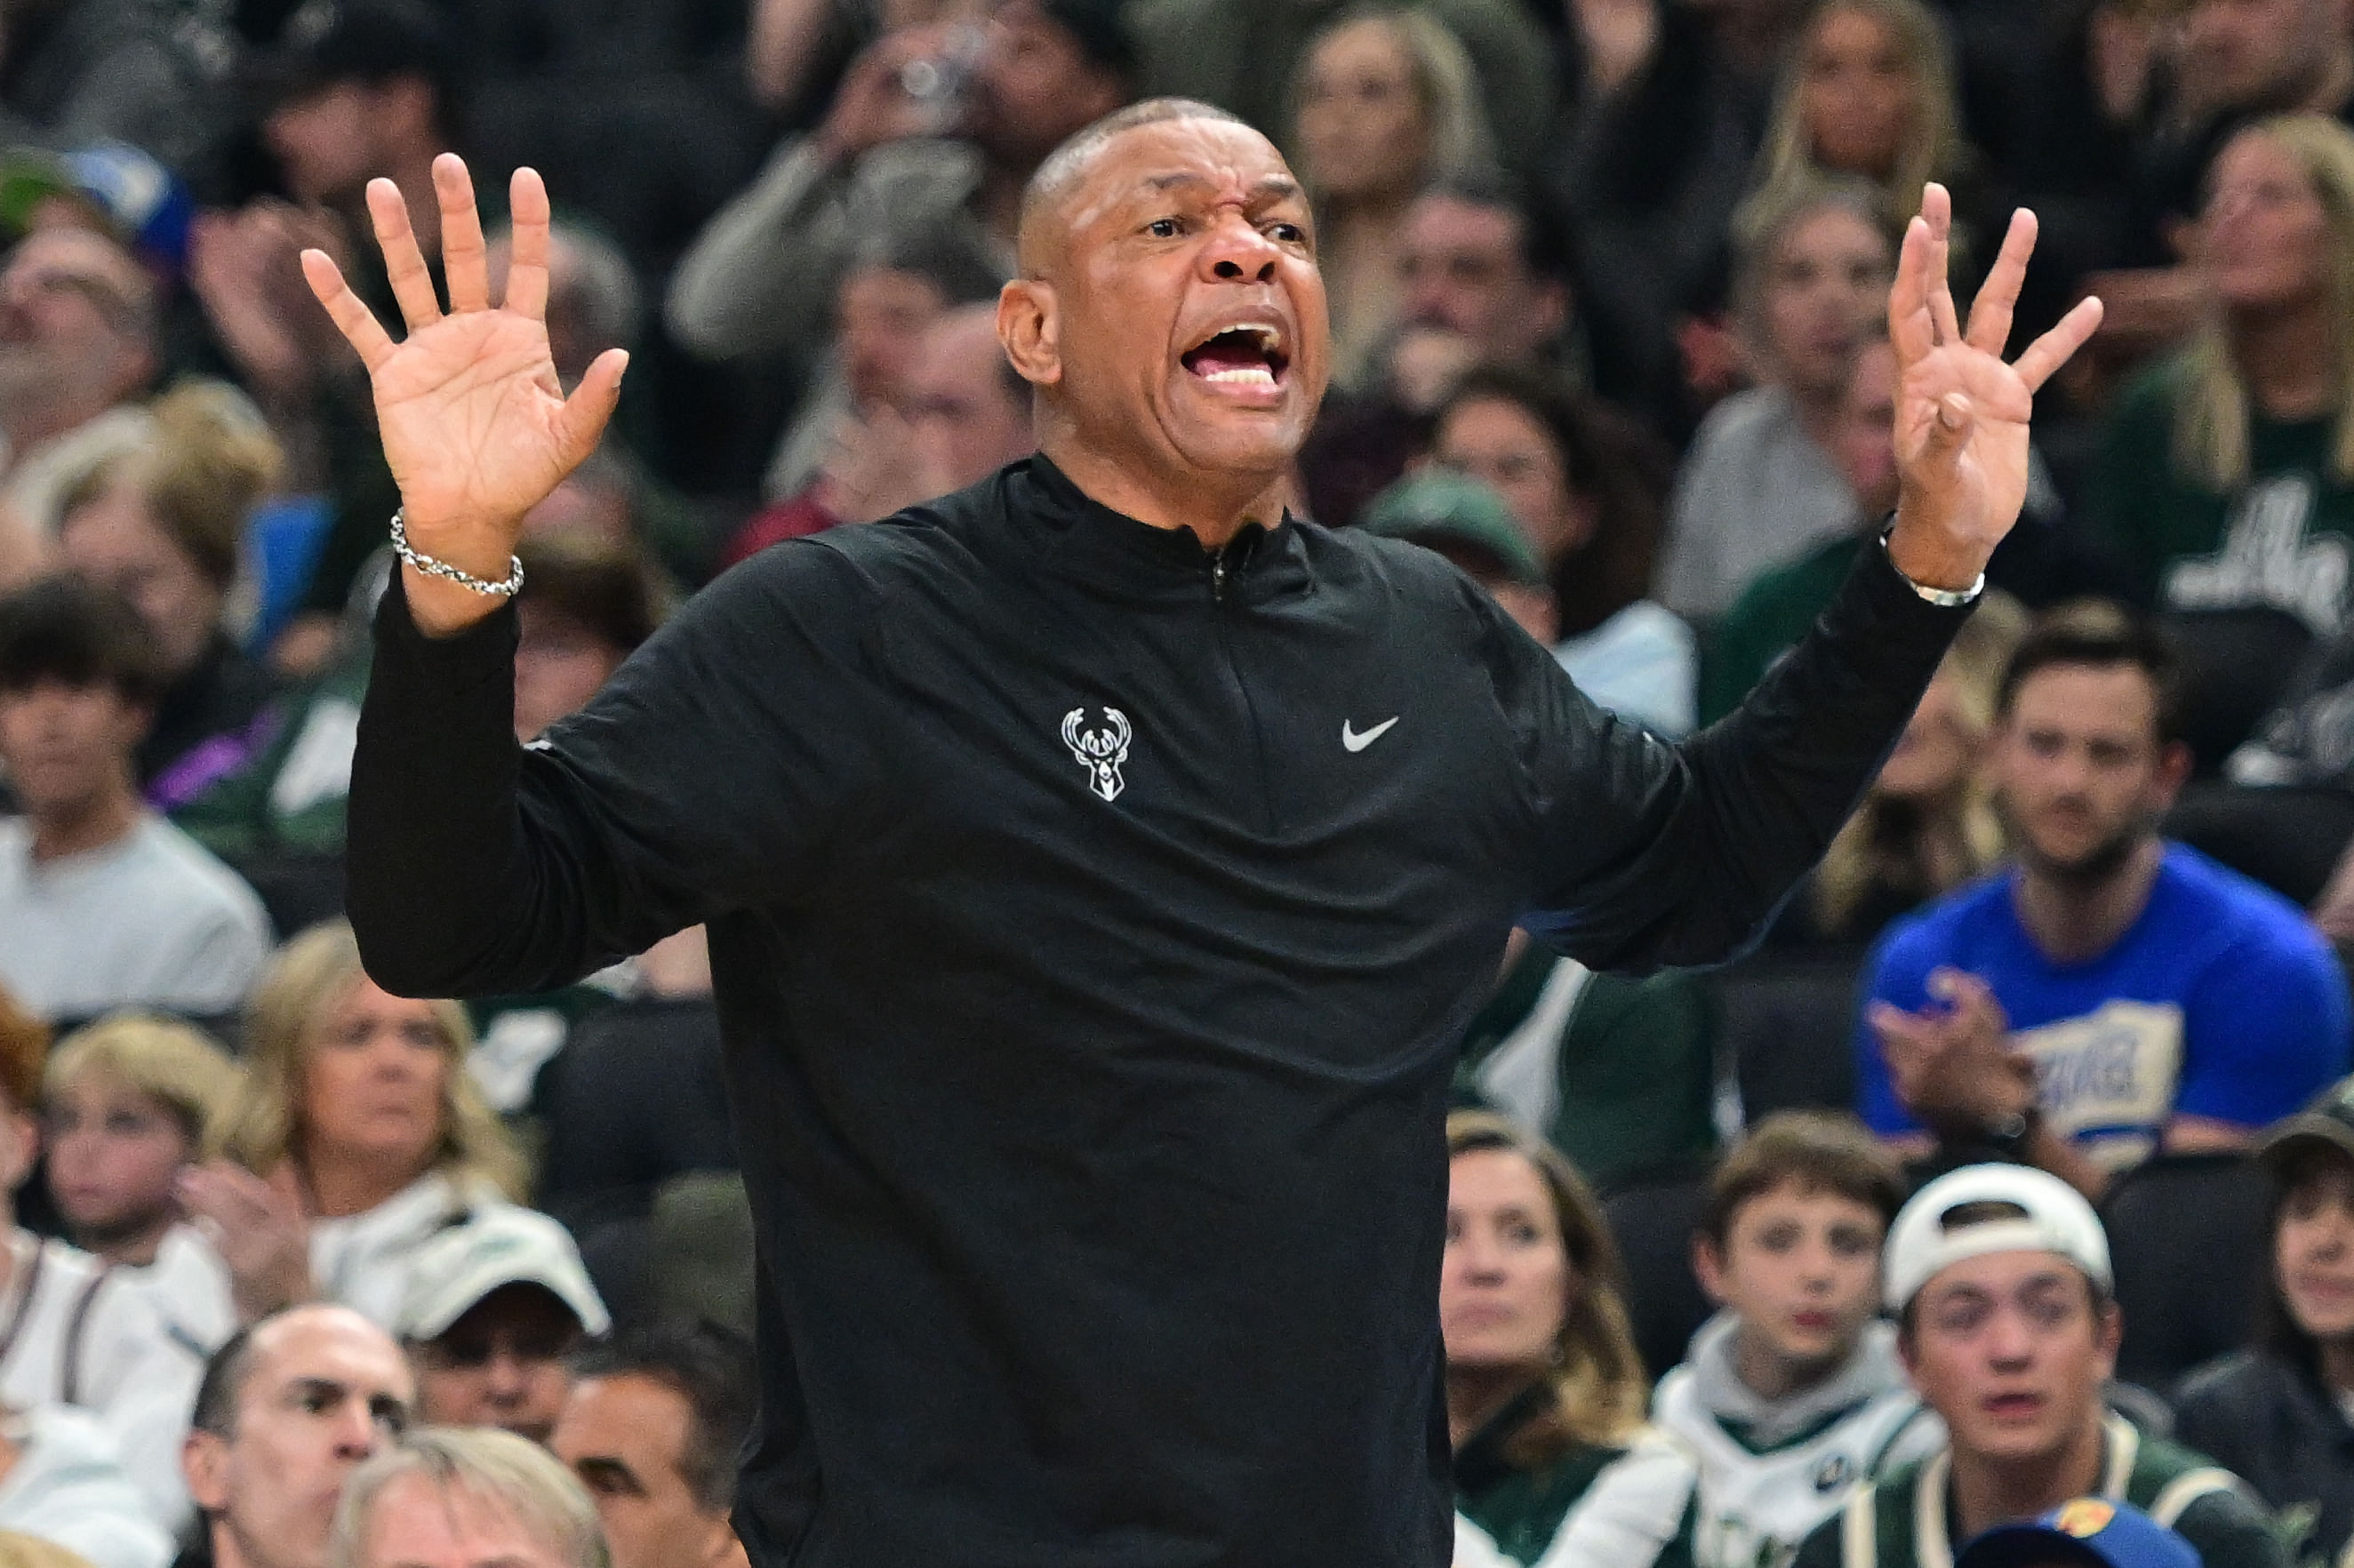 Doc Rivers wins playoff debut with the Bucks